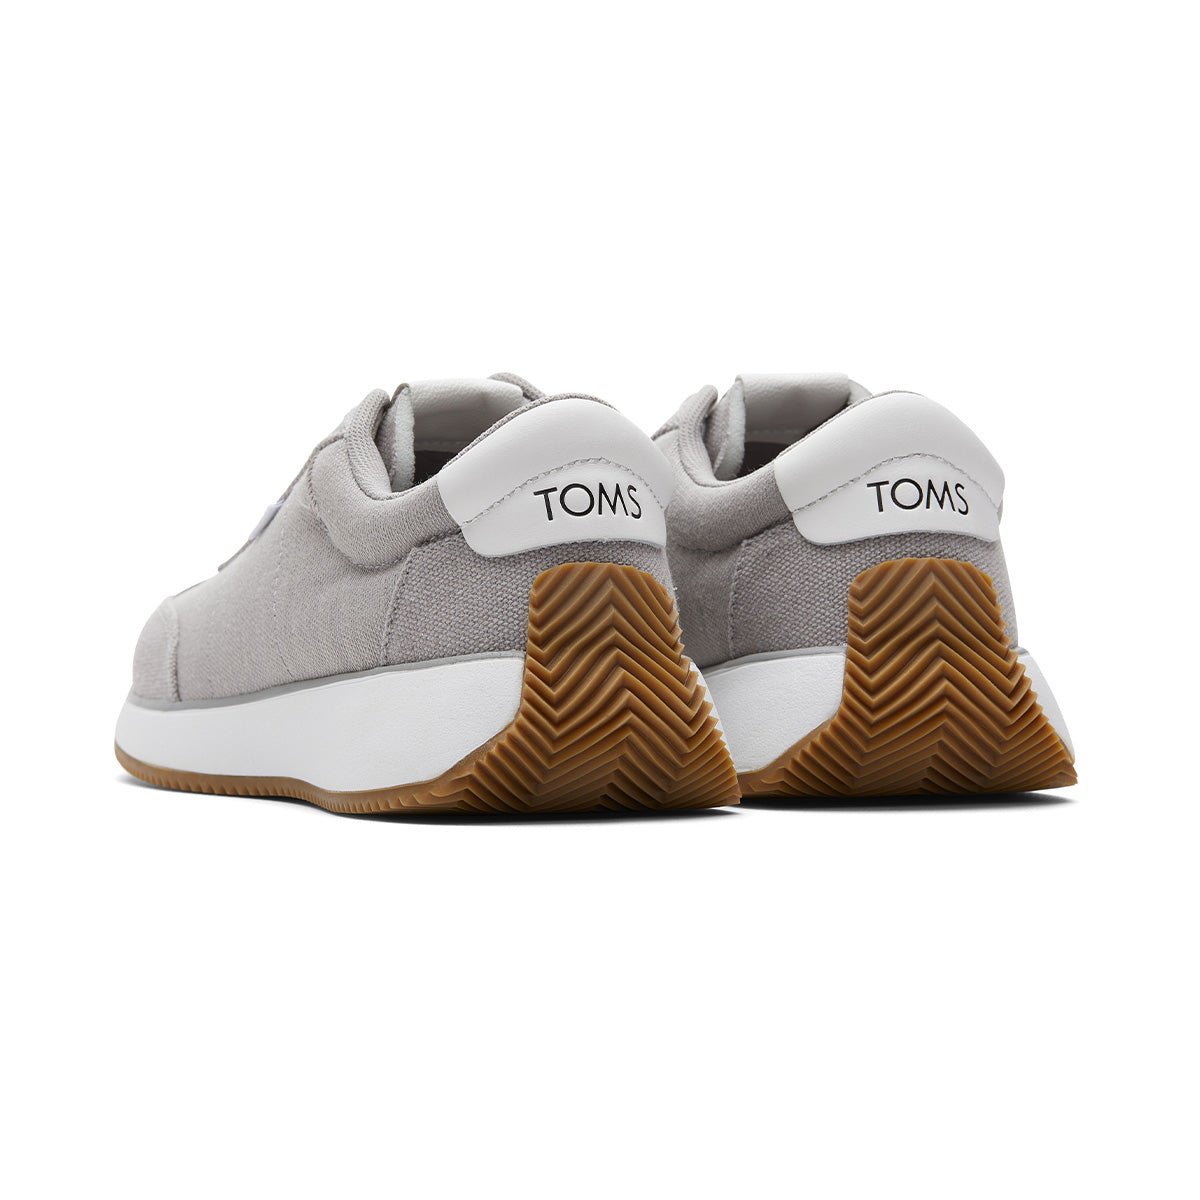 TOMS Sneakers Wyndon Women - Drizzle Grey Slubby Woven Washed Canvas